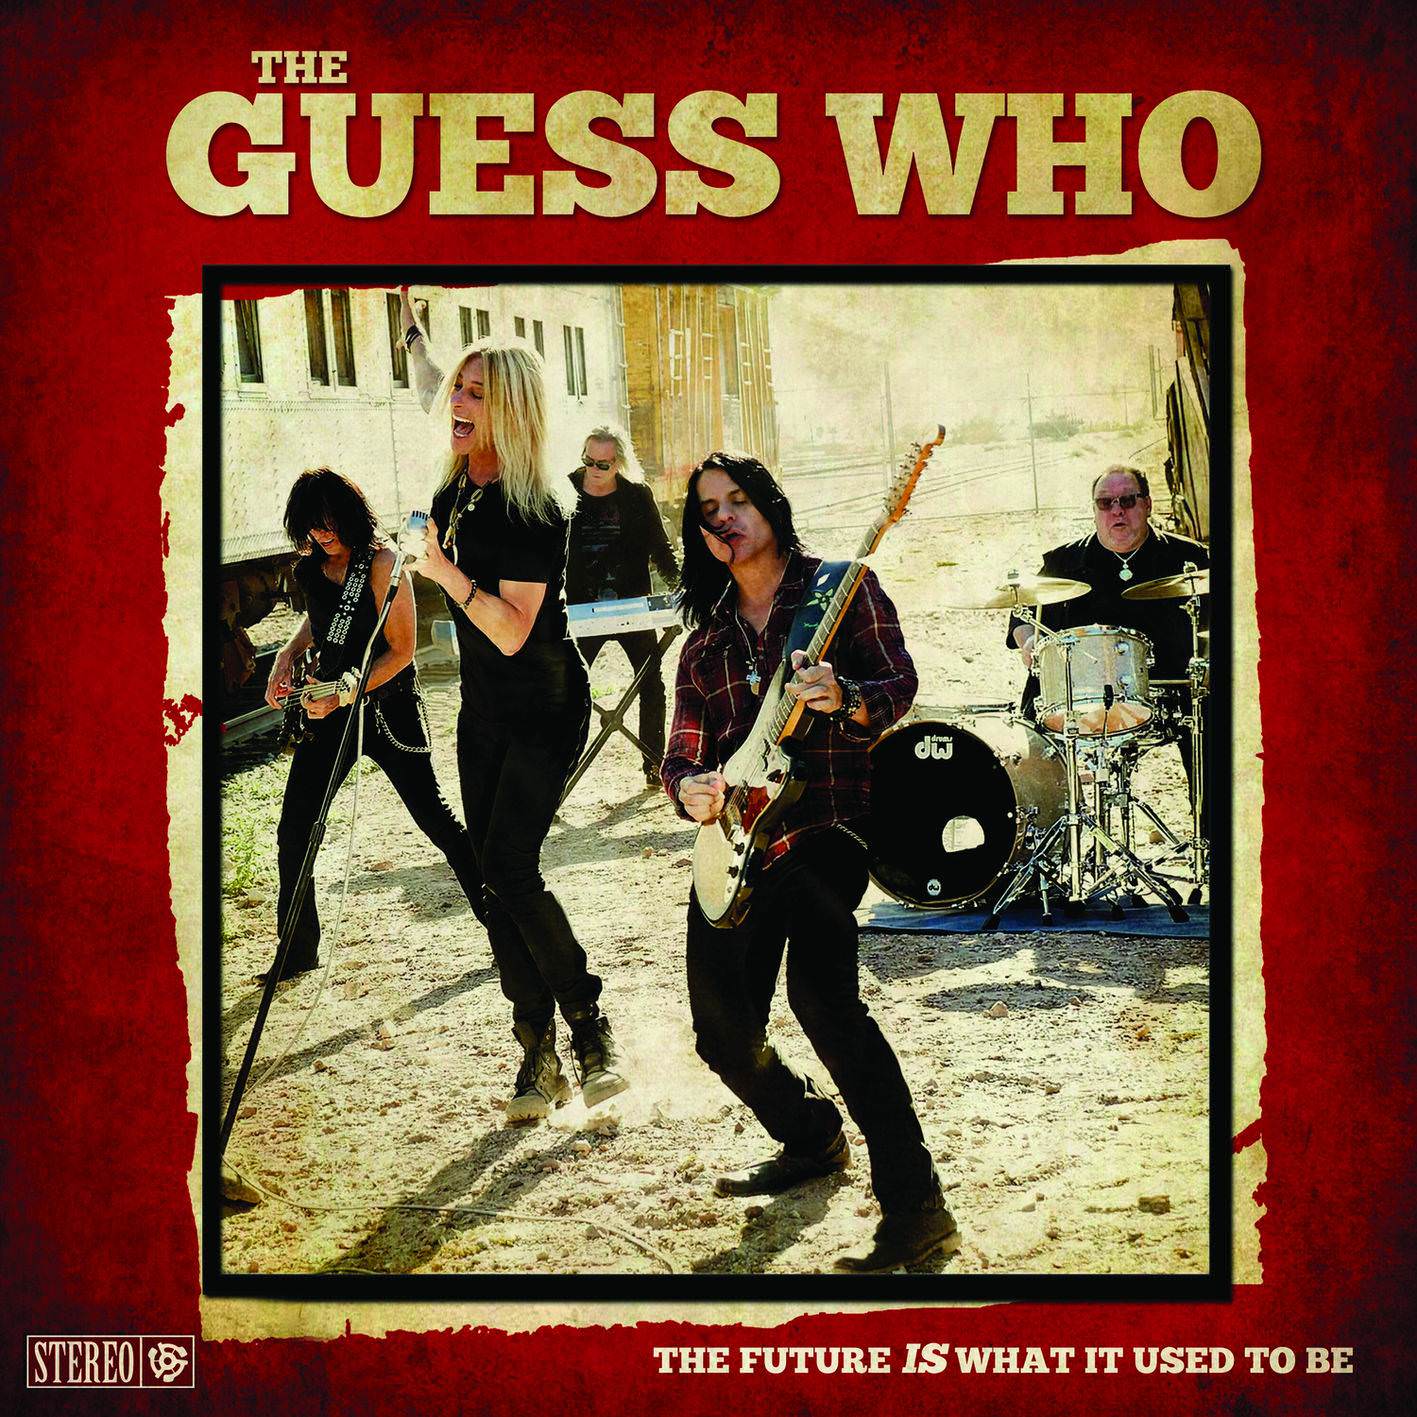 The Guess Who - The Future is What It Used to Be (2018) [FLAC 24bit/88,2kHz]